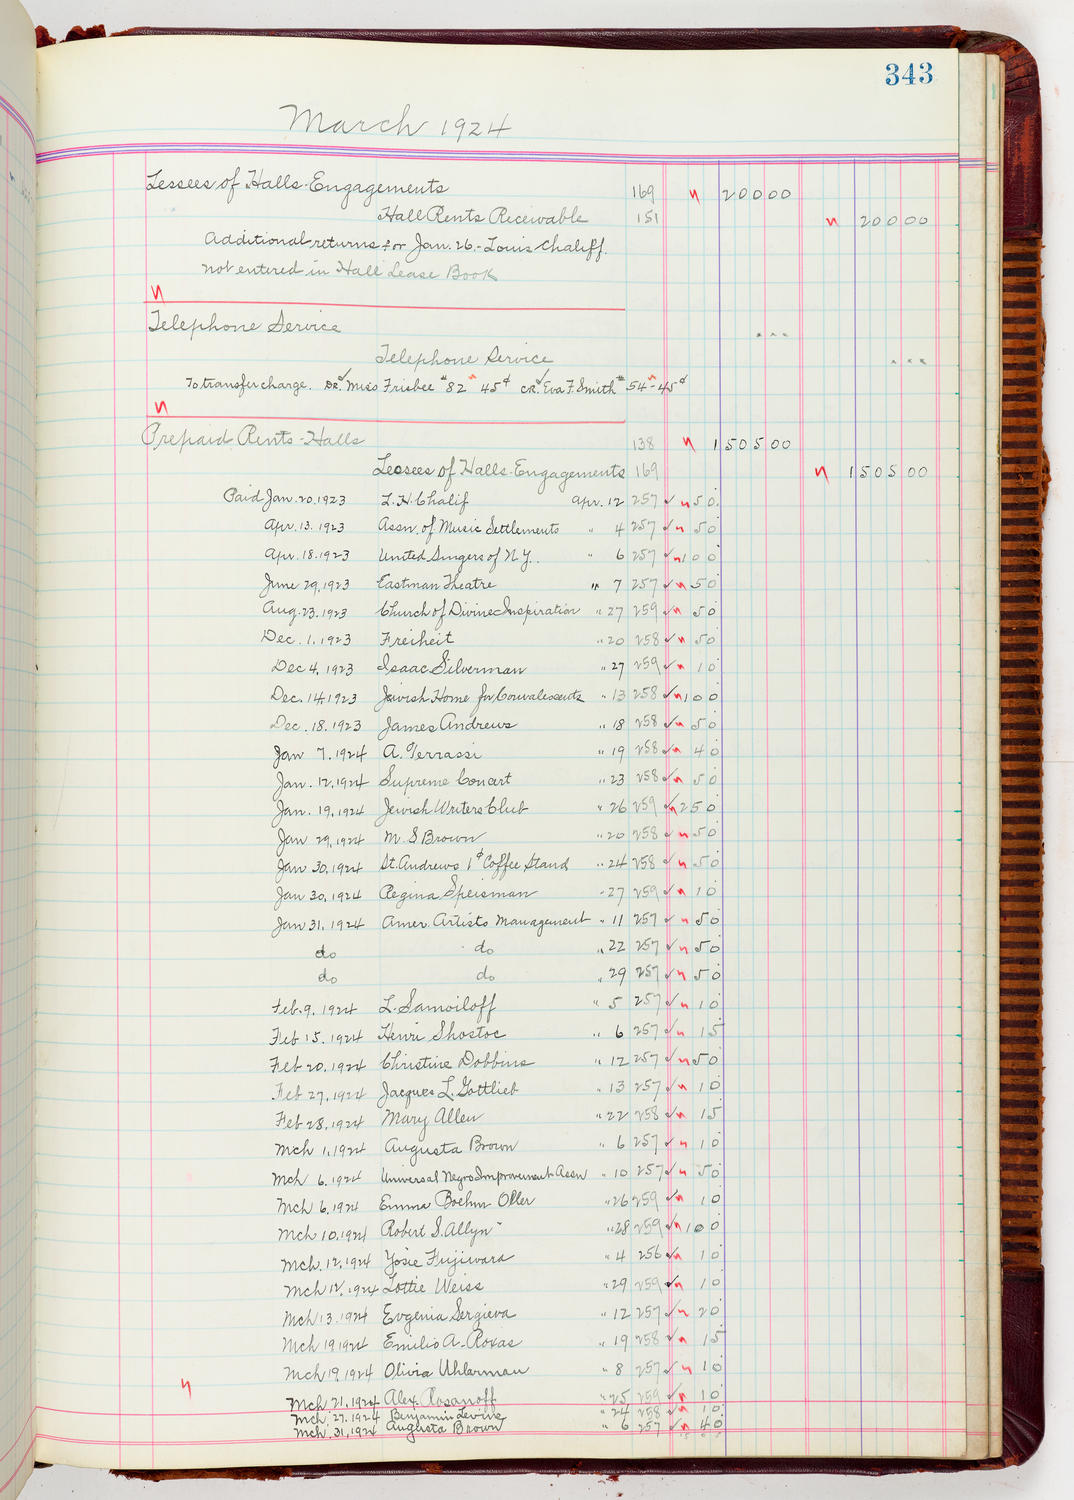 Music Hall Accounting Ledger, volume 5, page 343